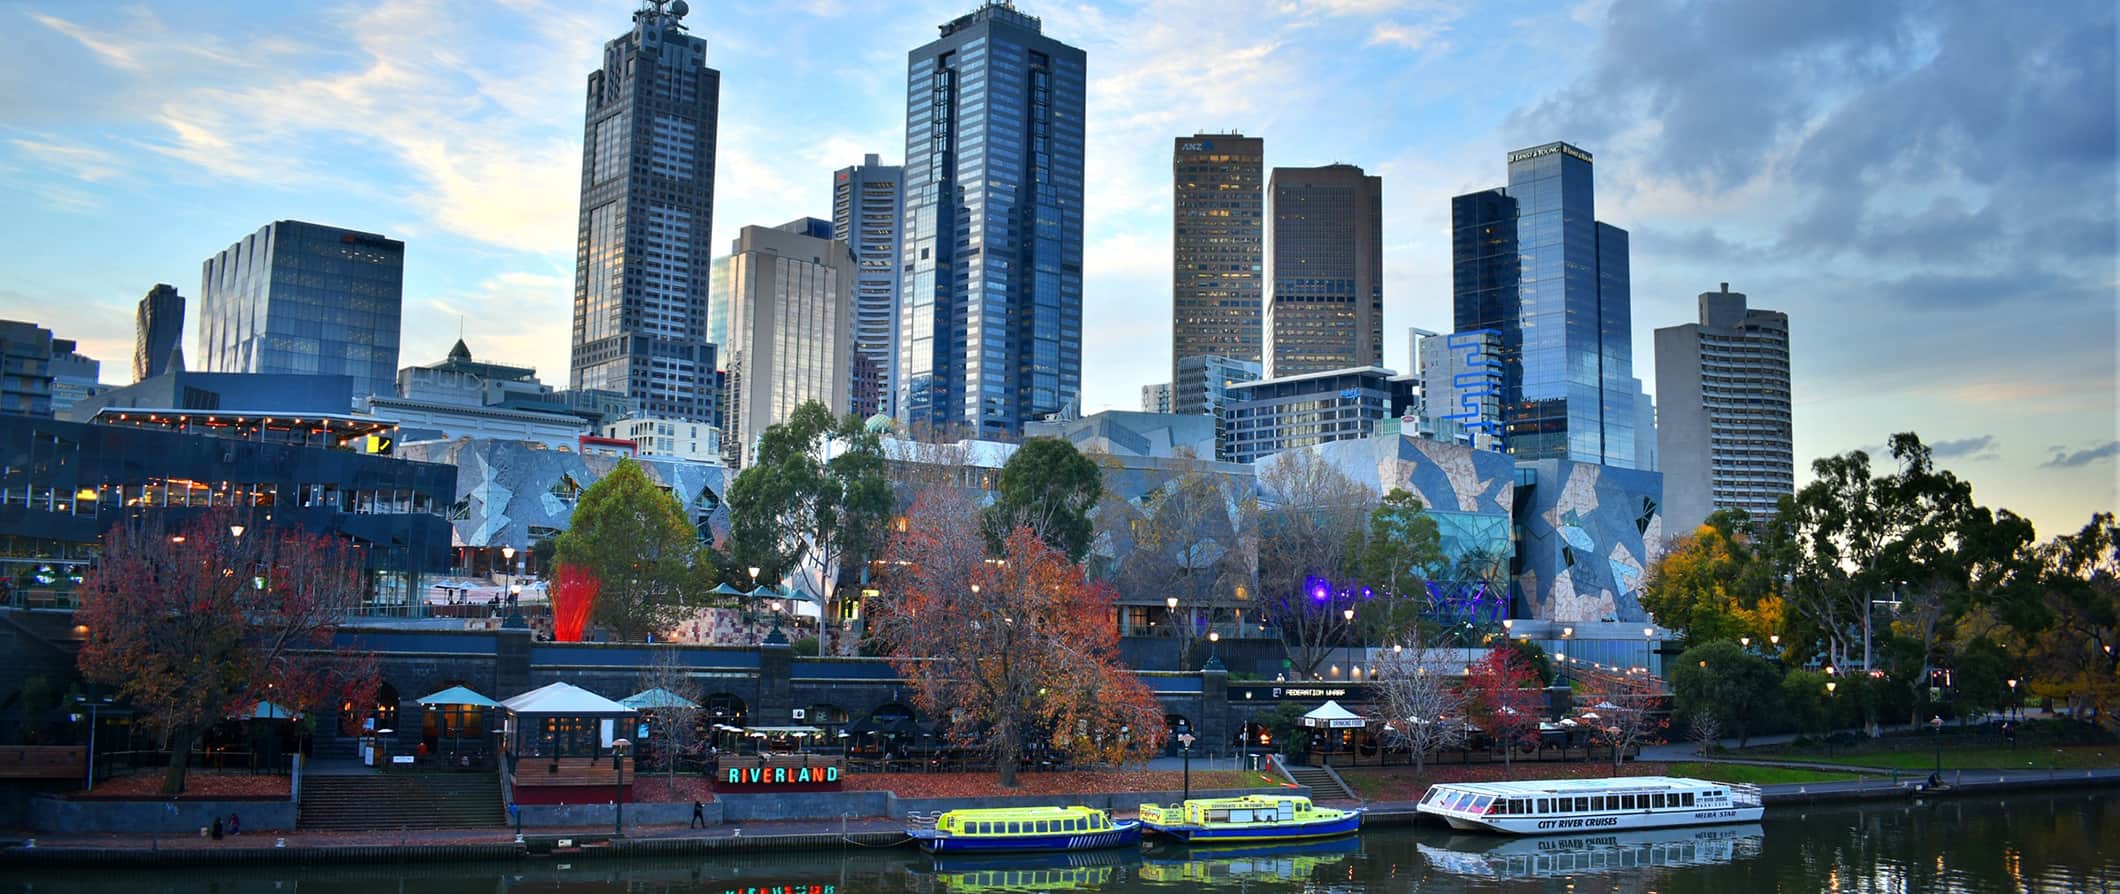 A view of the towering skyline in the lively city of Melbourne, Australia